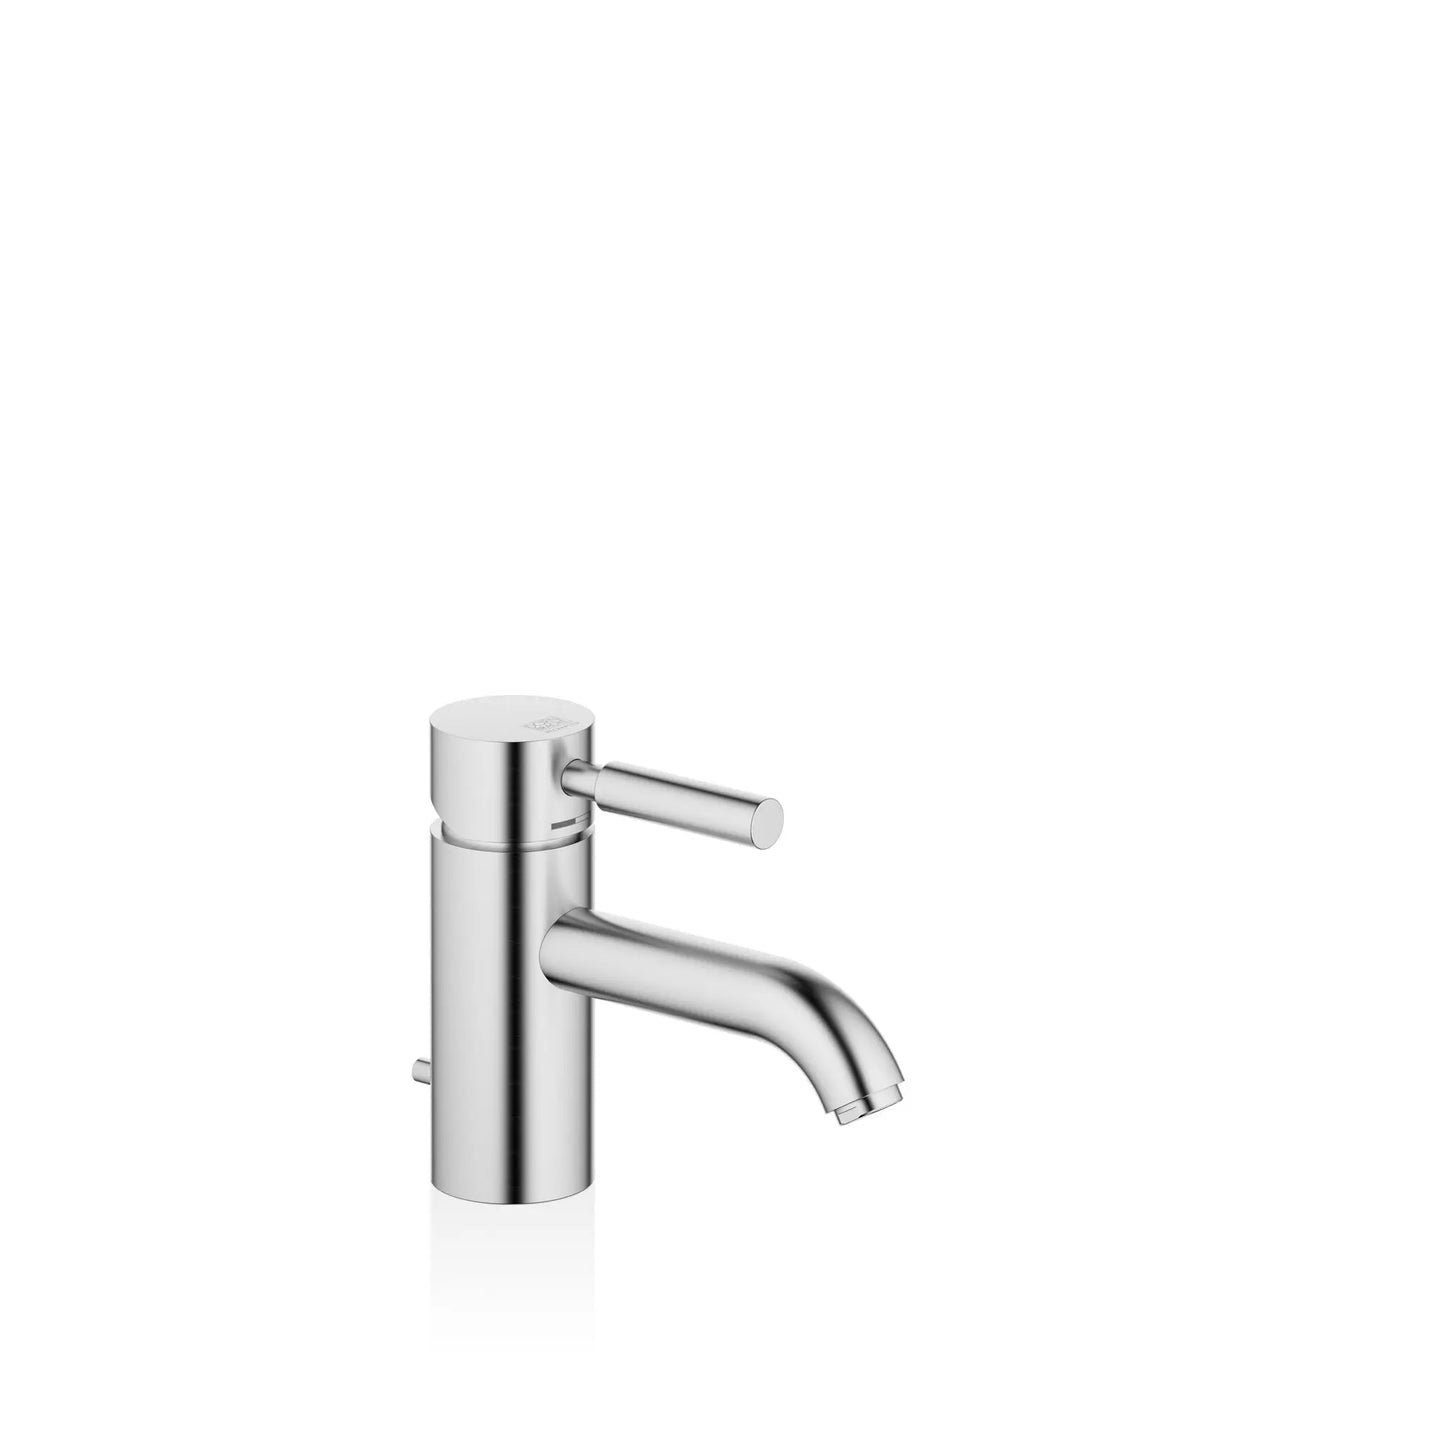 EDITION PRO Single-lever basin mixer with pop-up waste